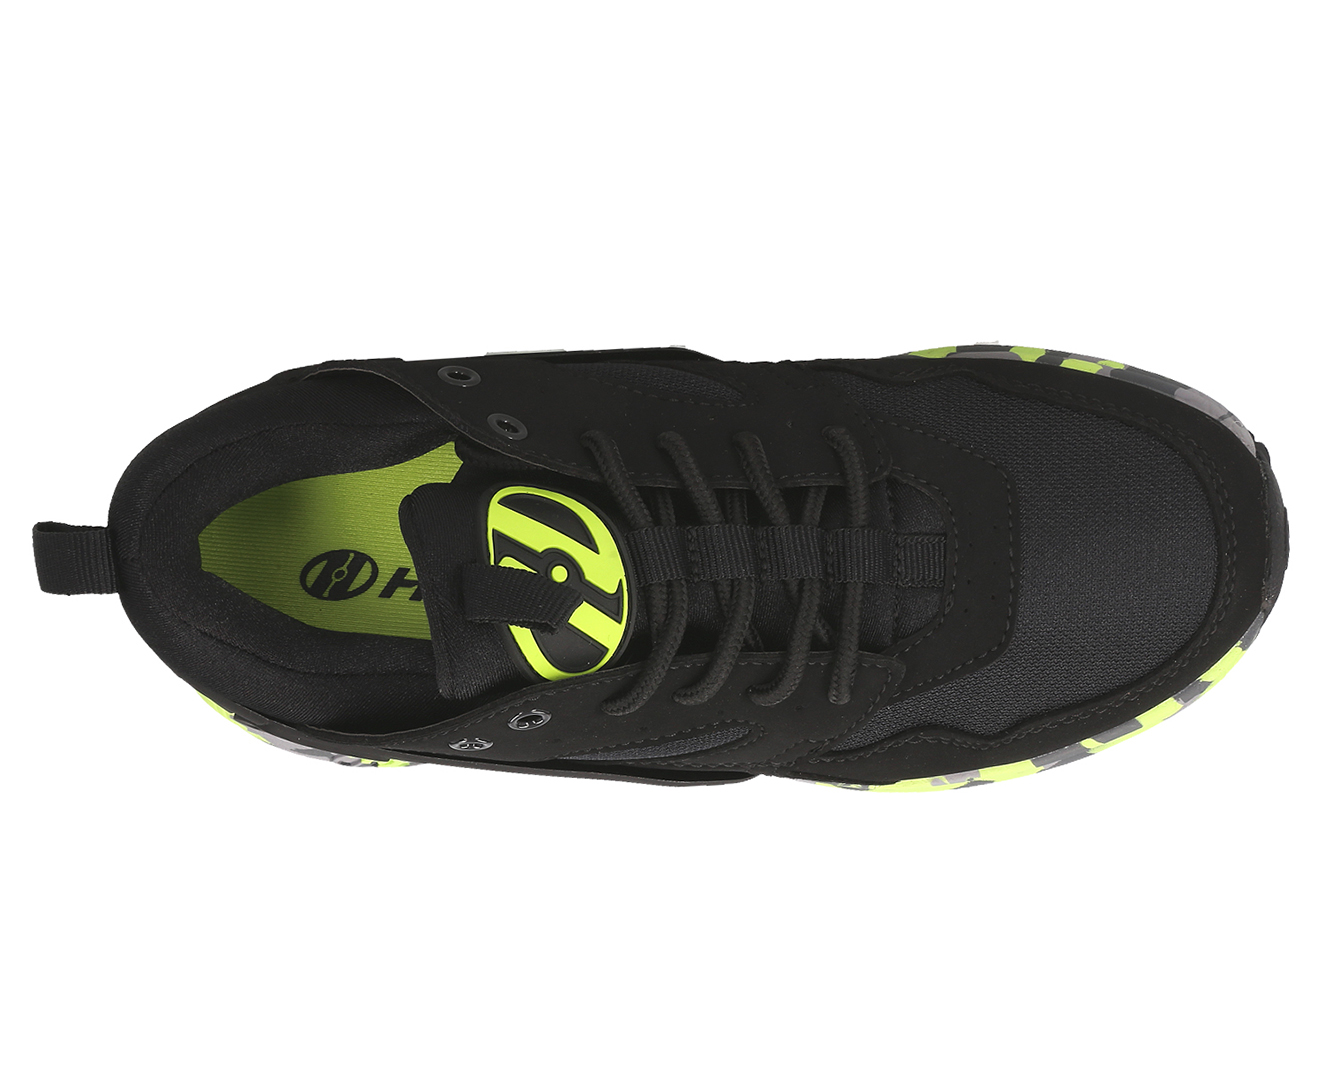 Heelys Boys' Force Skate Roller Shoes - Black/Bright Yellow | Catch.co.nz